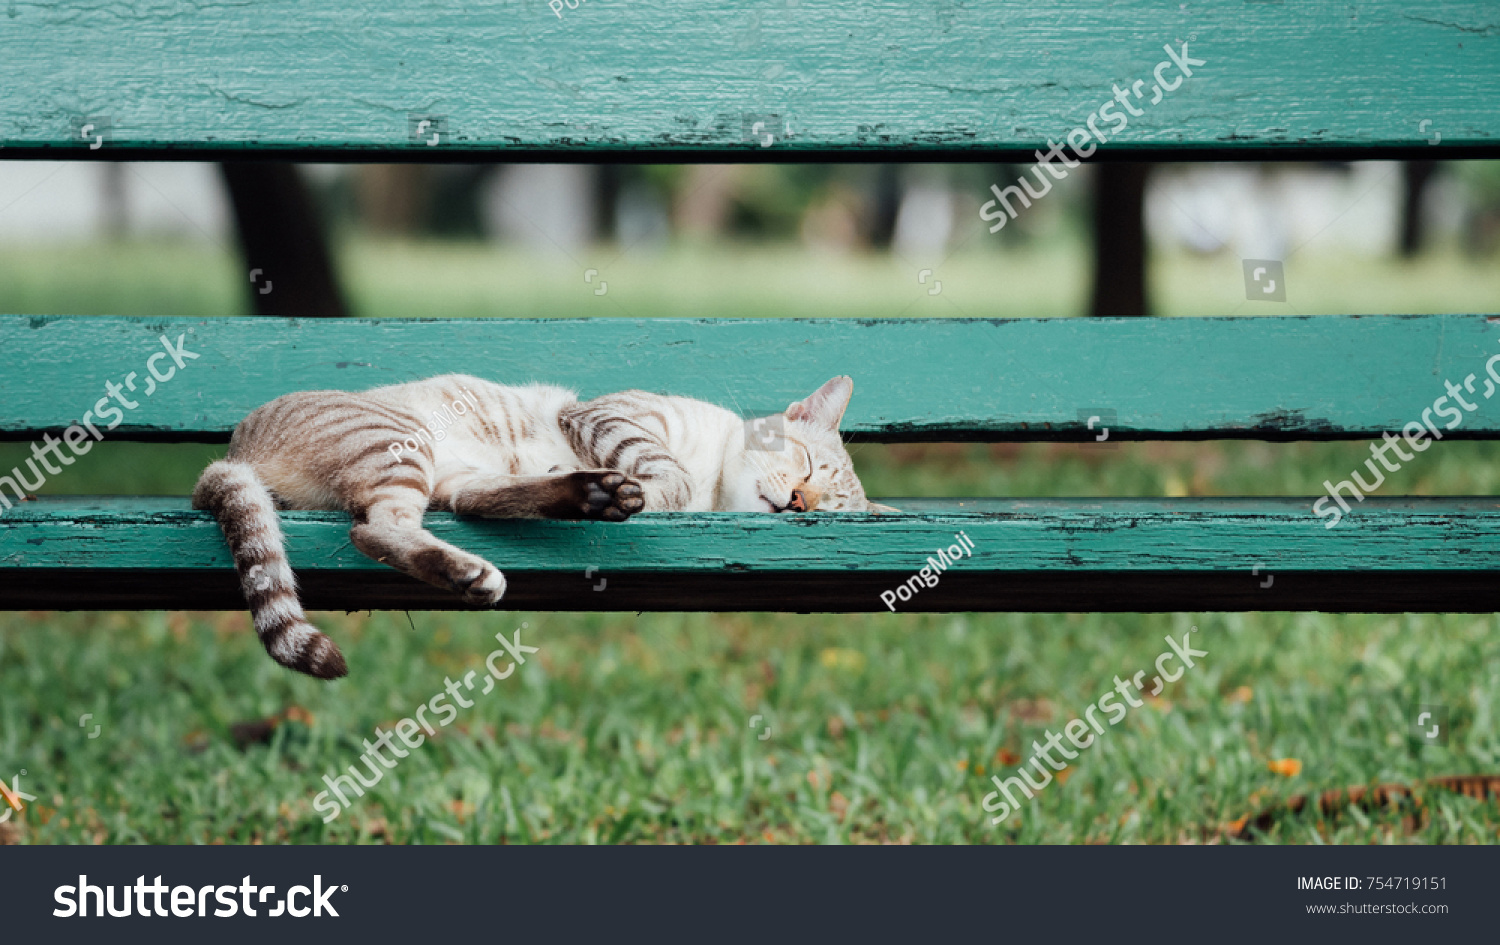 Cat is a animal type mammal and pet so cute gray color sleeping for relax on a outdoor green wooden chair at park with green nature #754719151